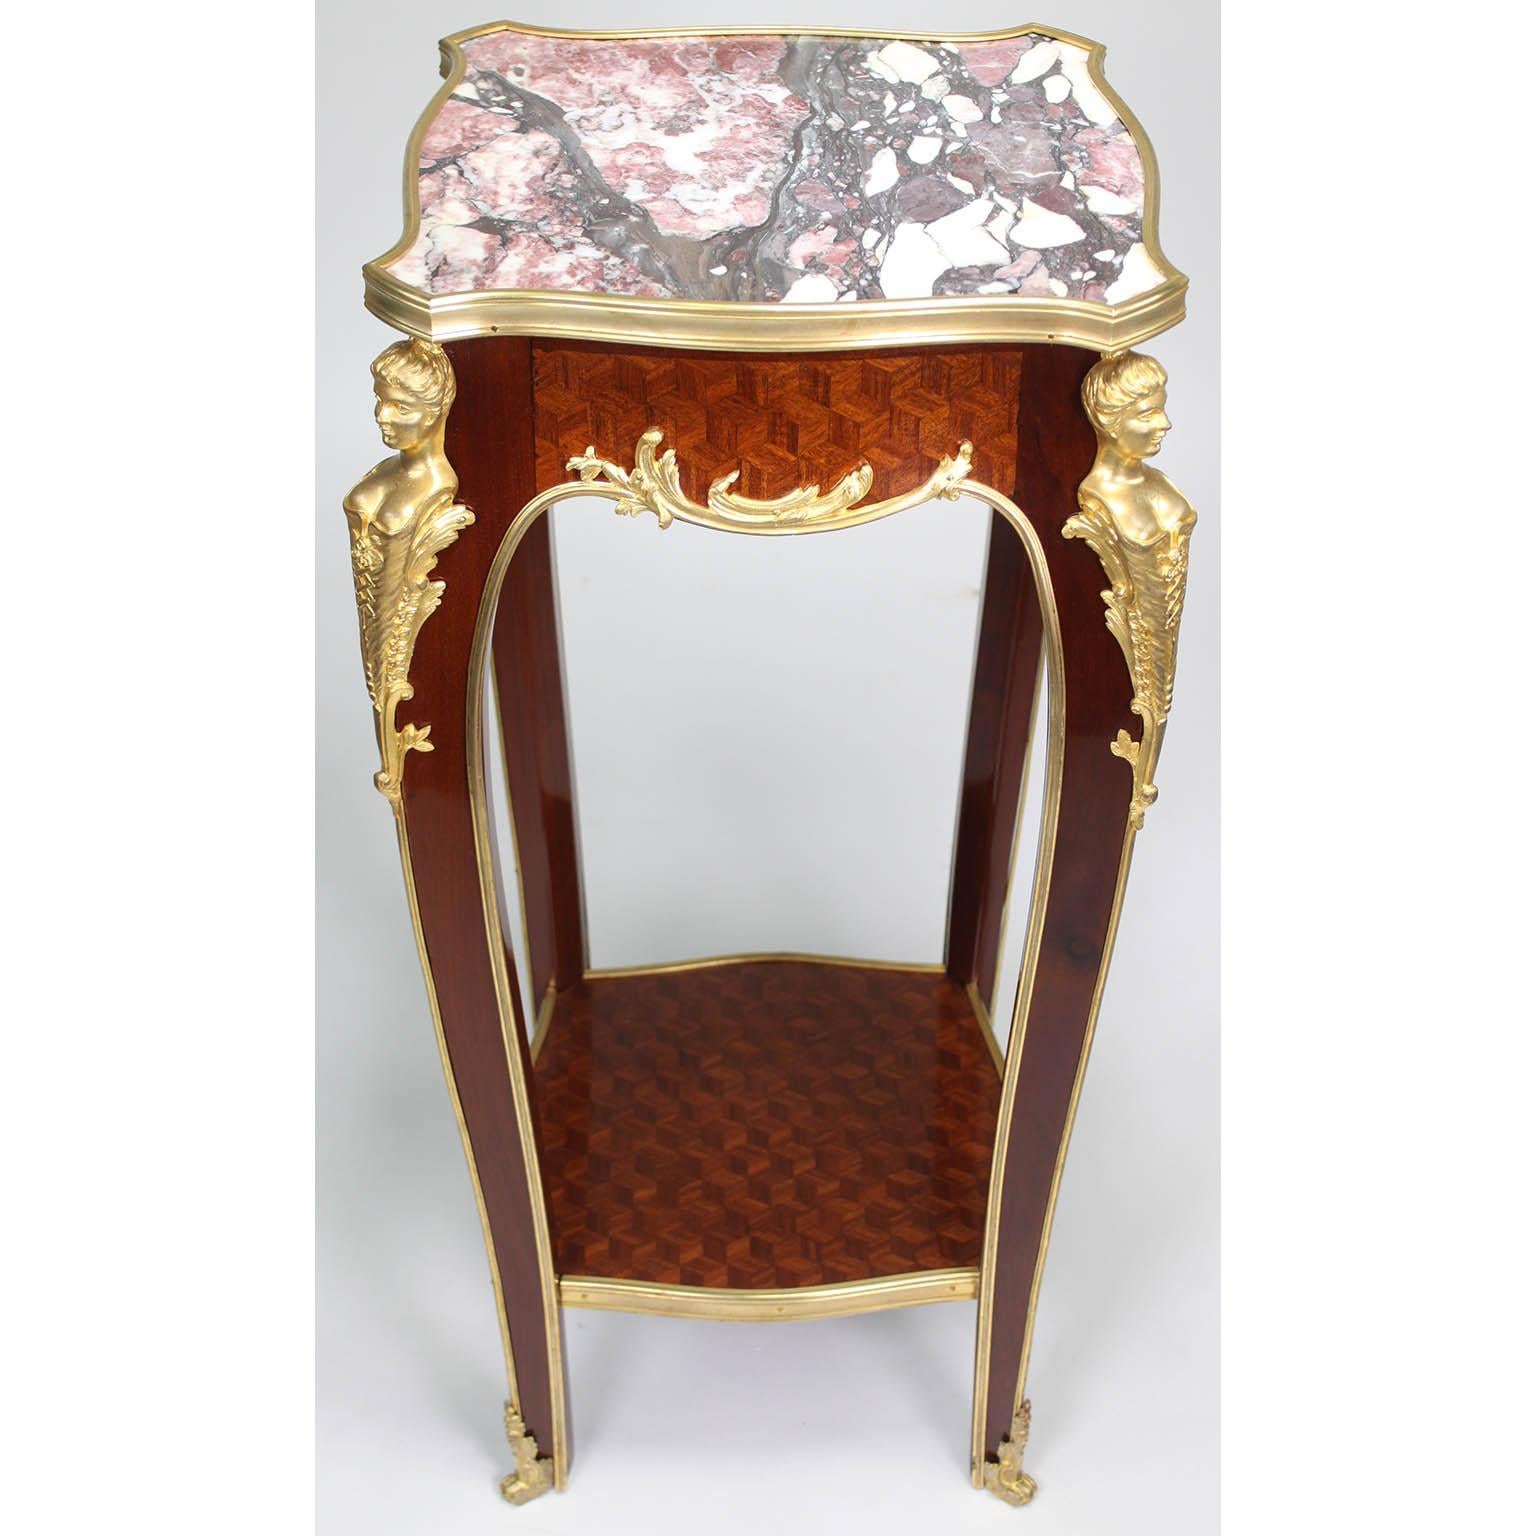 A Fine French 19th-20th Century Louis XV style Mahogany, Satinwood and Gilt-Bronze (Ormolu) Mounted Side Table by Franc¸ois Linke (1855-1946). The square shaped table fitted with a Bre^che Violette marble top with a gilt bronze trim, the body